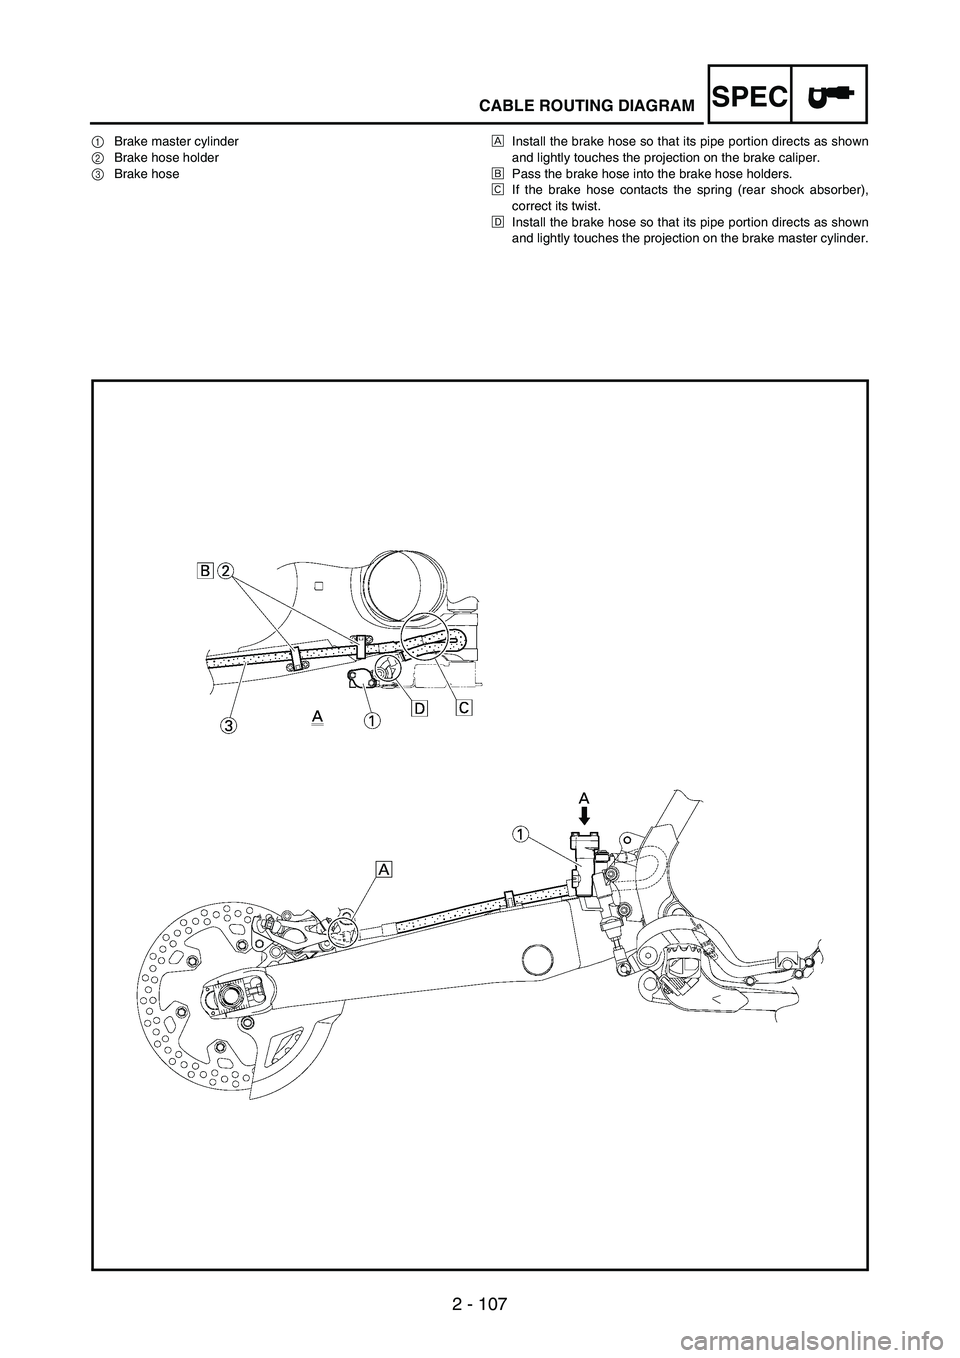 YAMAHA WR 250F 2006  Owners Manual SPEC
2 - 107
CABLE ROUTING DIAGRAM
1Brake master cylinder
2Brake hose holder
3Brake hoseÈInstall the brake hose so that its pipe portion directs as shown
and lightly touches the projection on the bra